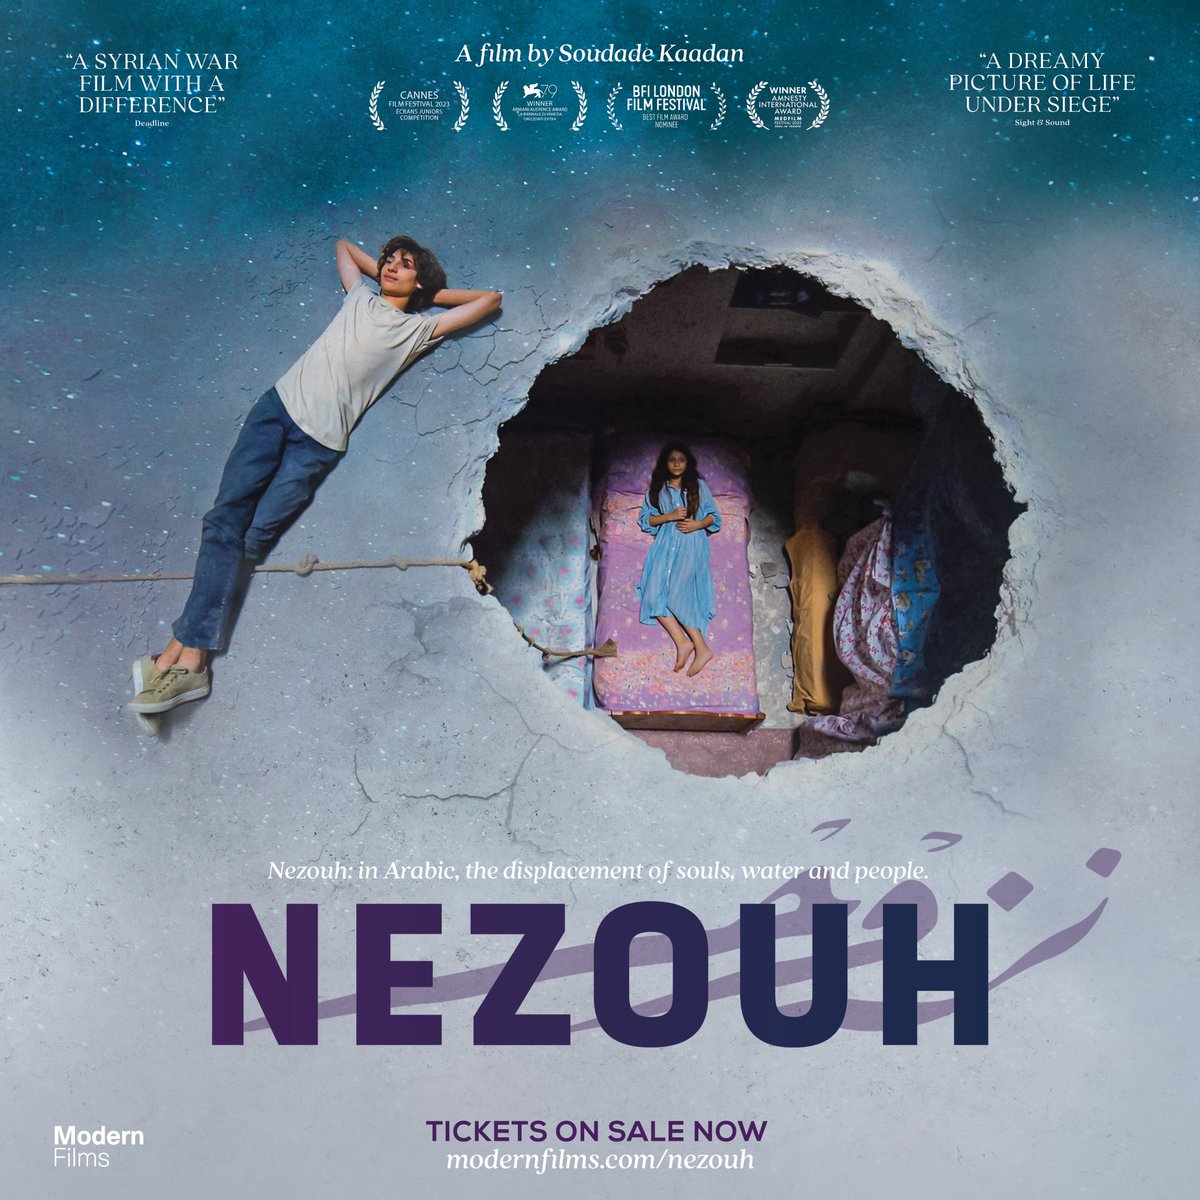 Nezouh: in Arabic, the displacement of souls, water and people. Soudade Kaadan’s NEZOUH is now showing in cinemas! Venice Film Festival award-winner, and featuring cinematography from Hélène Louvart (La Chimera, The Lost Daughter). Book now: modernfilms.com/nezouh